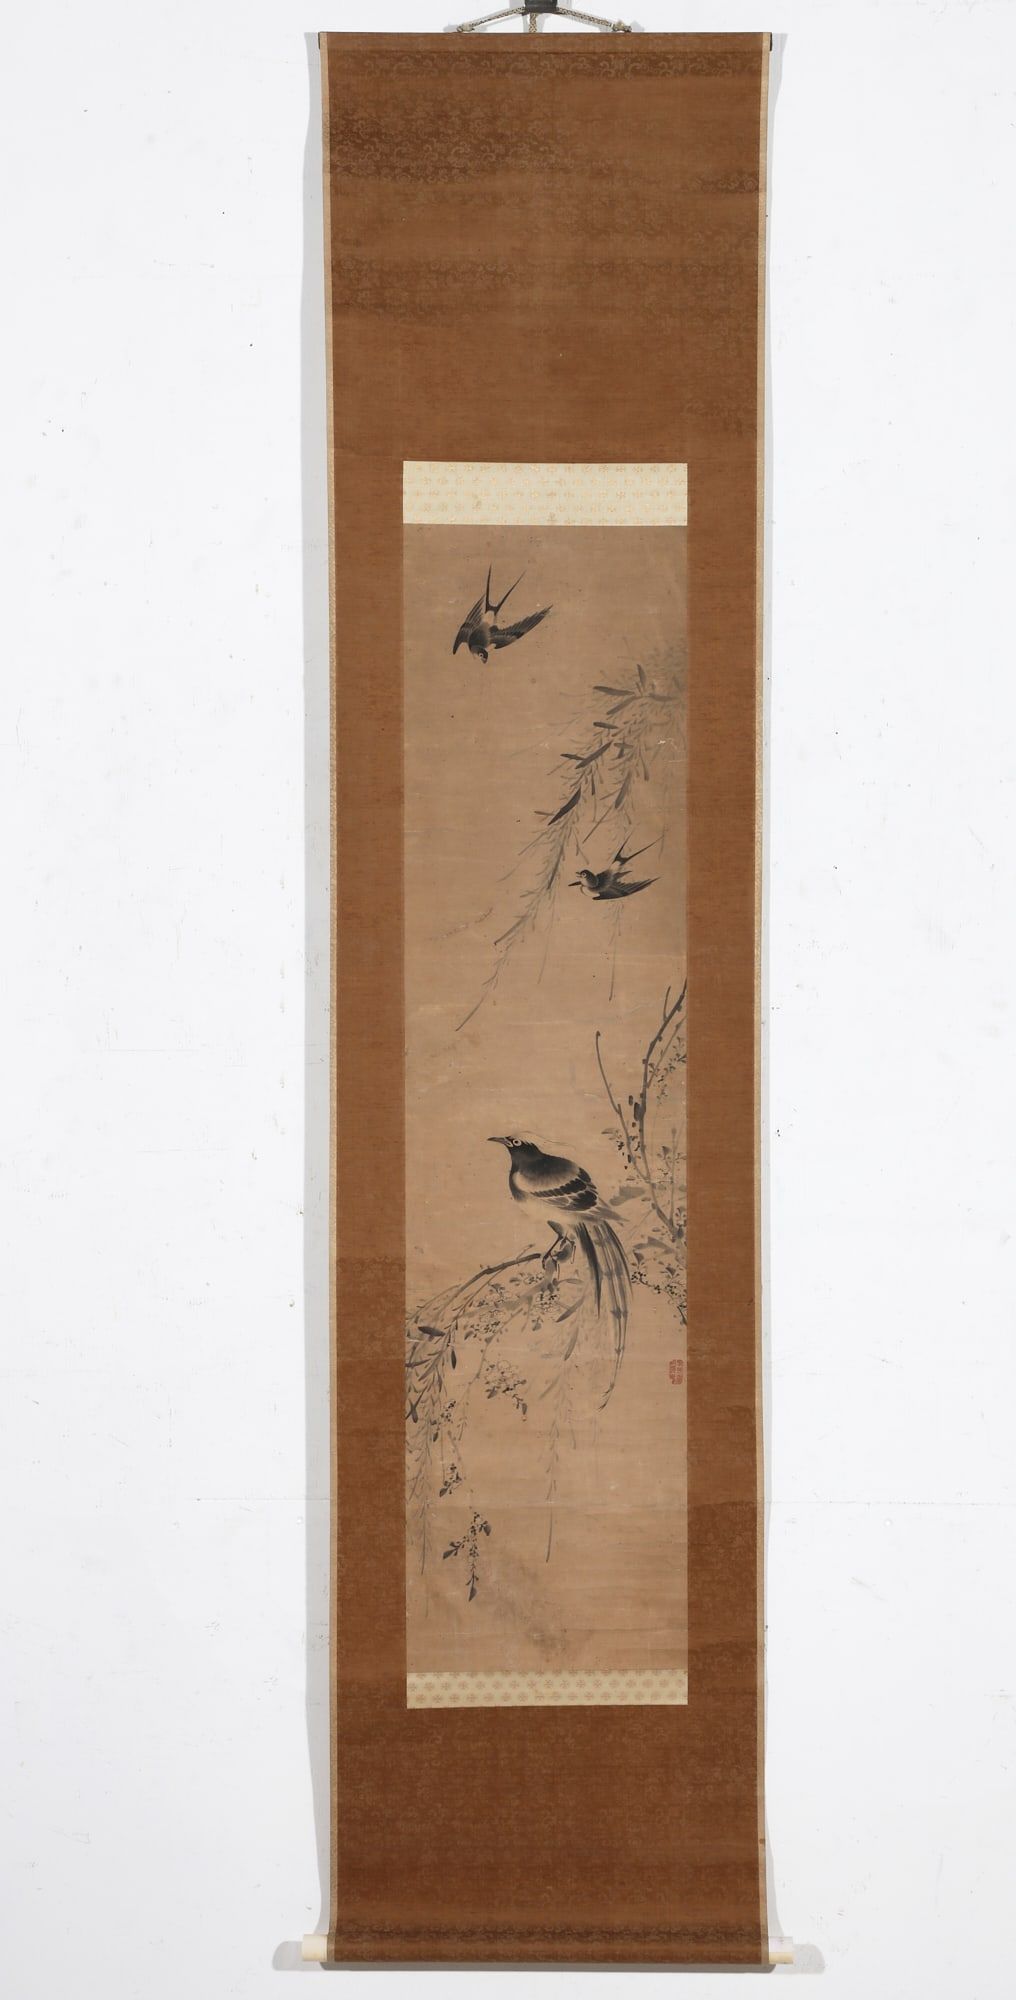 A CHINESE SCROLL DEPICTING BIRDS AND